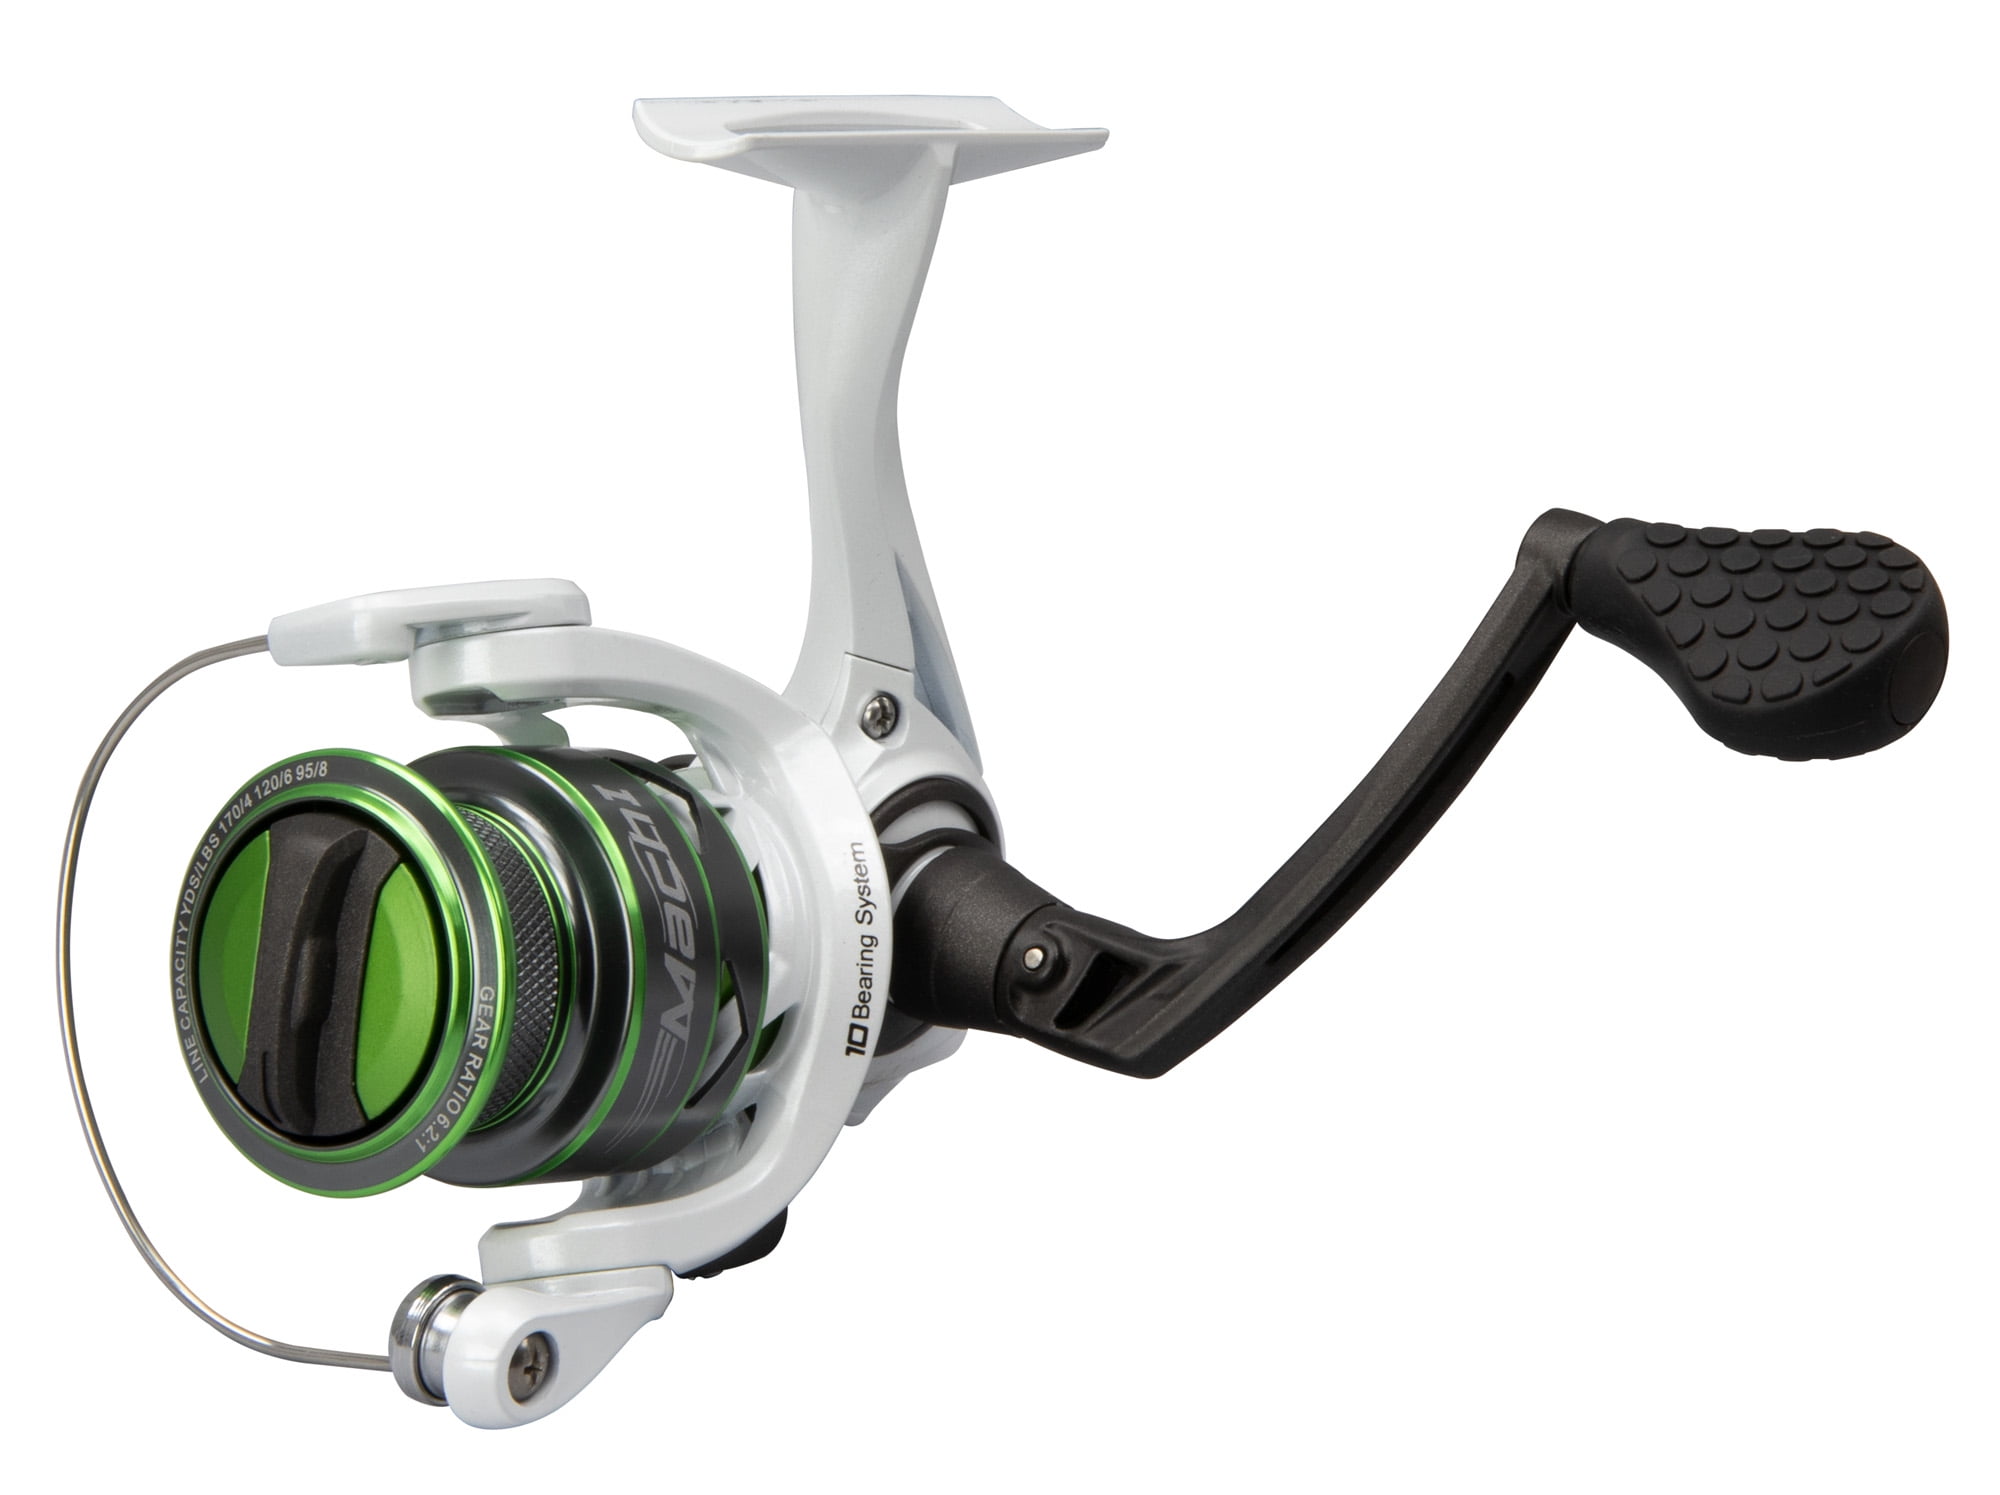 Lew's Mach 2 Freshwater Bass Fishing Spinning Reel 6.2:1 MH2-300A 